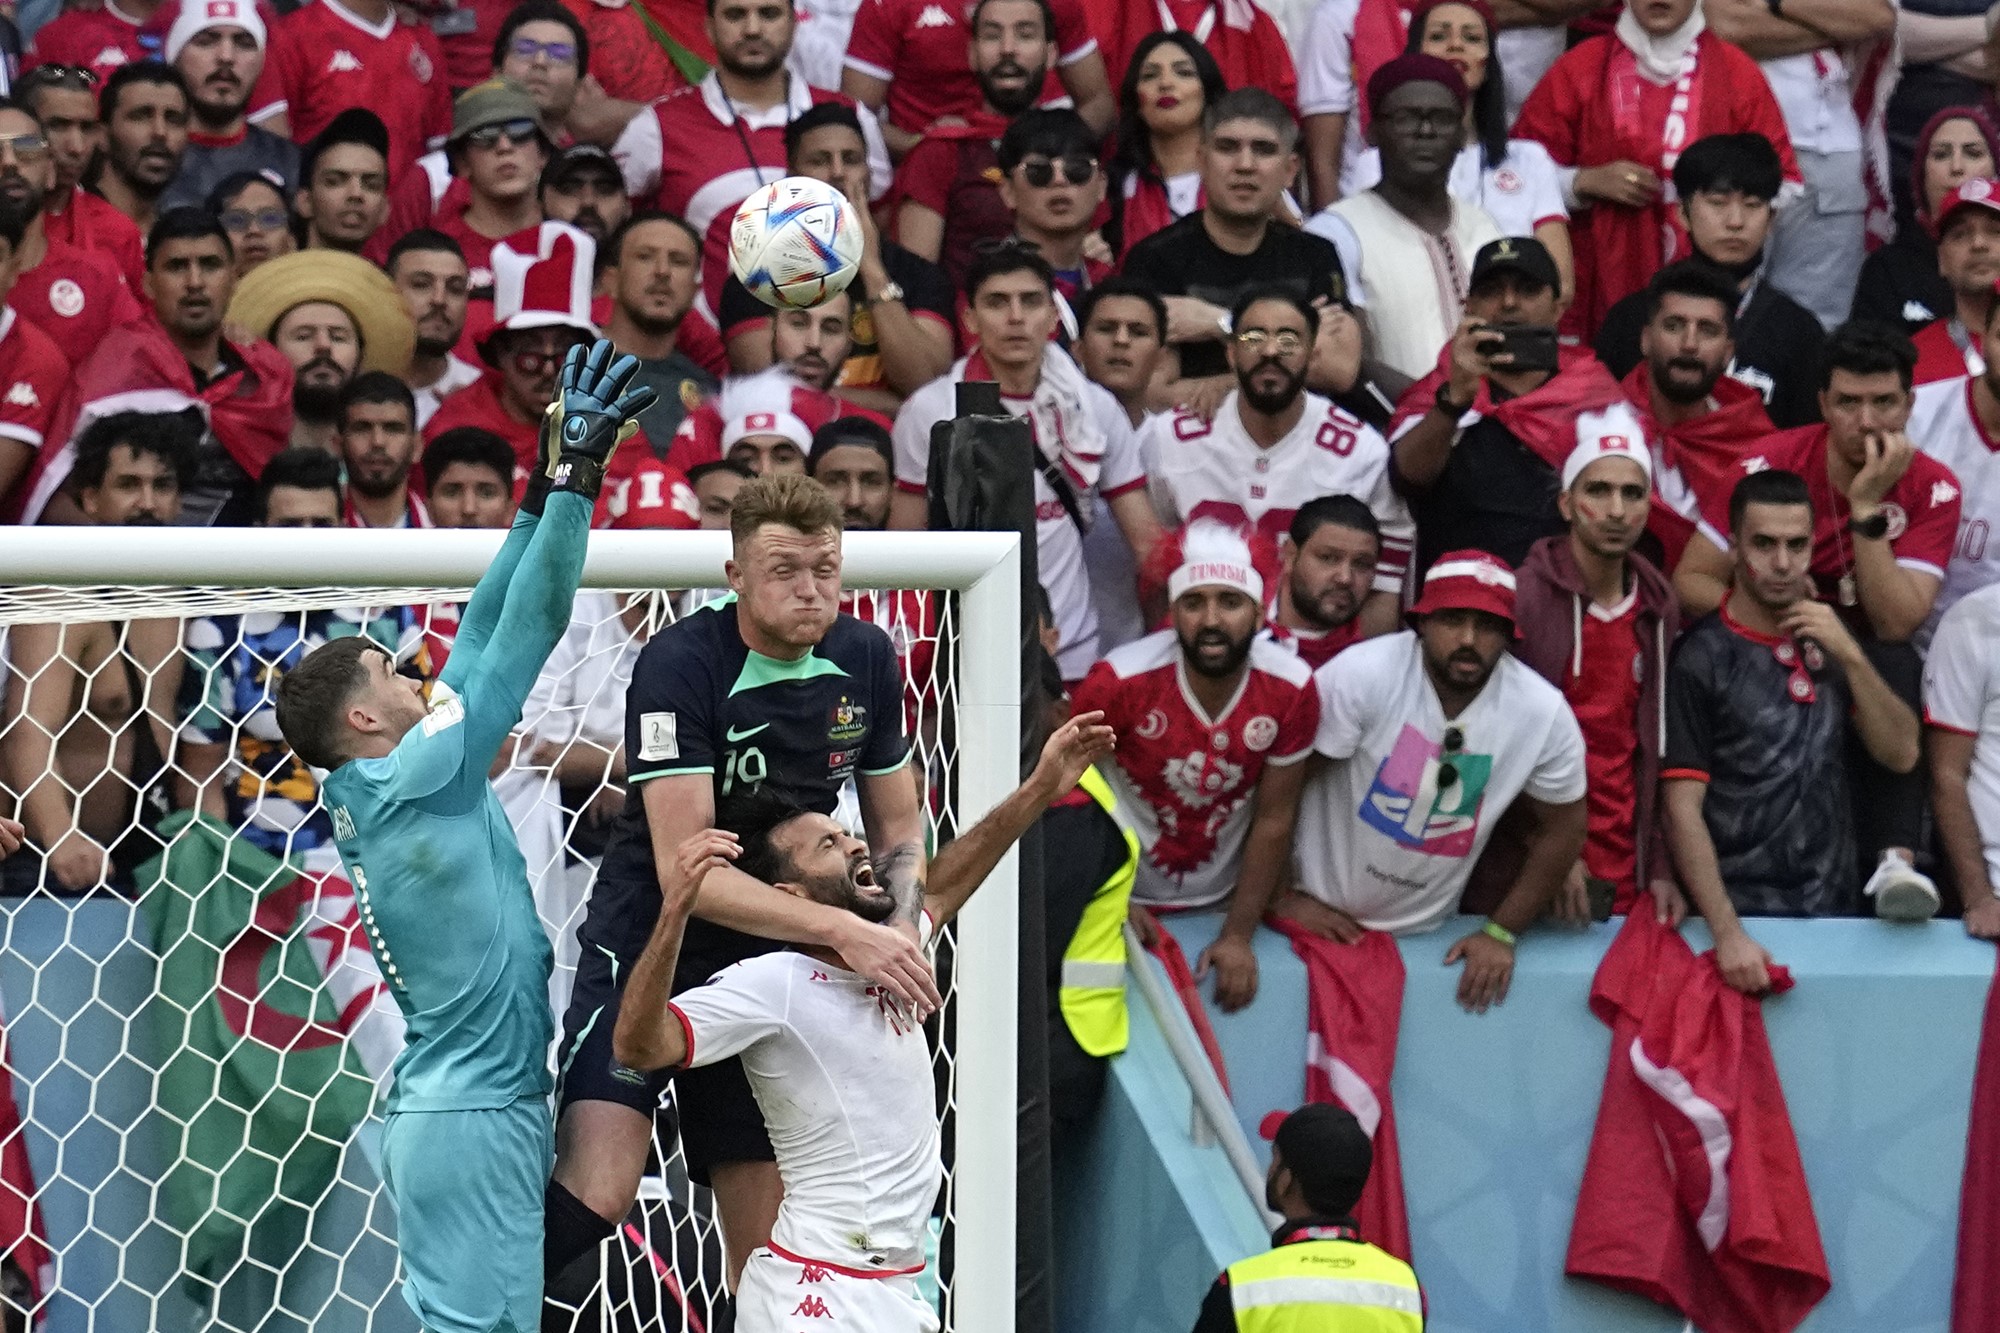 An Australian goalkeeper and defender go up for the ball in a physical contest with a Tunisian forward.